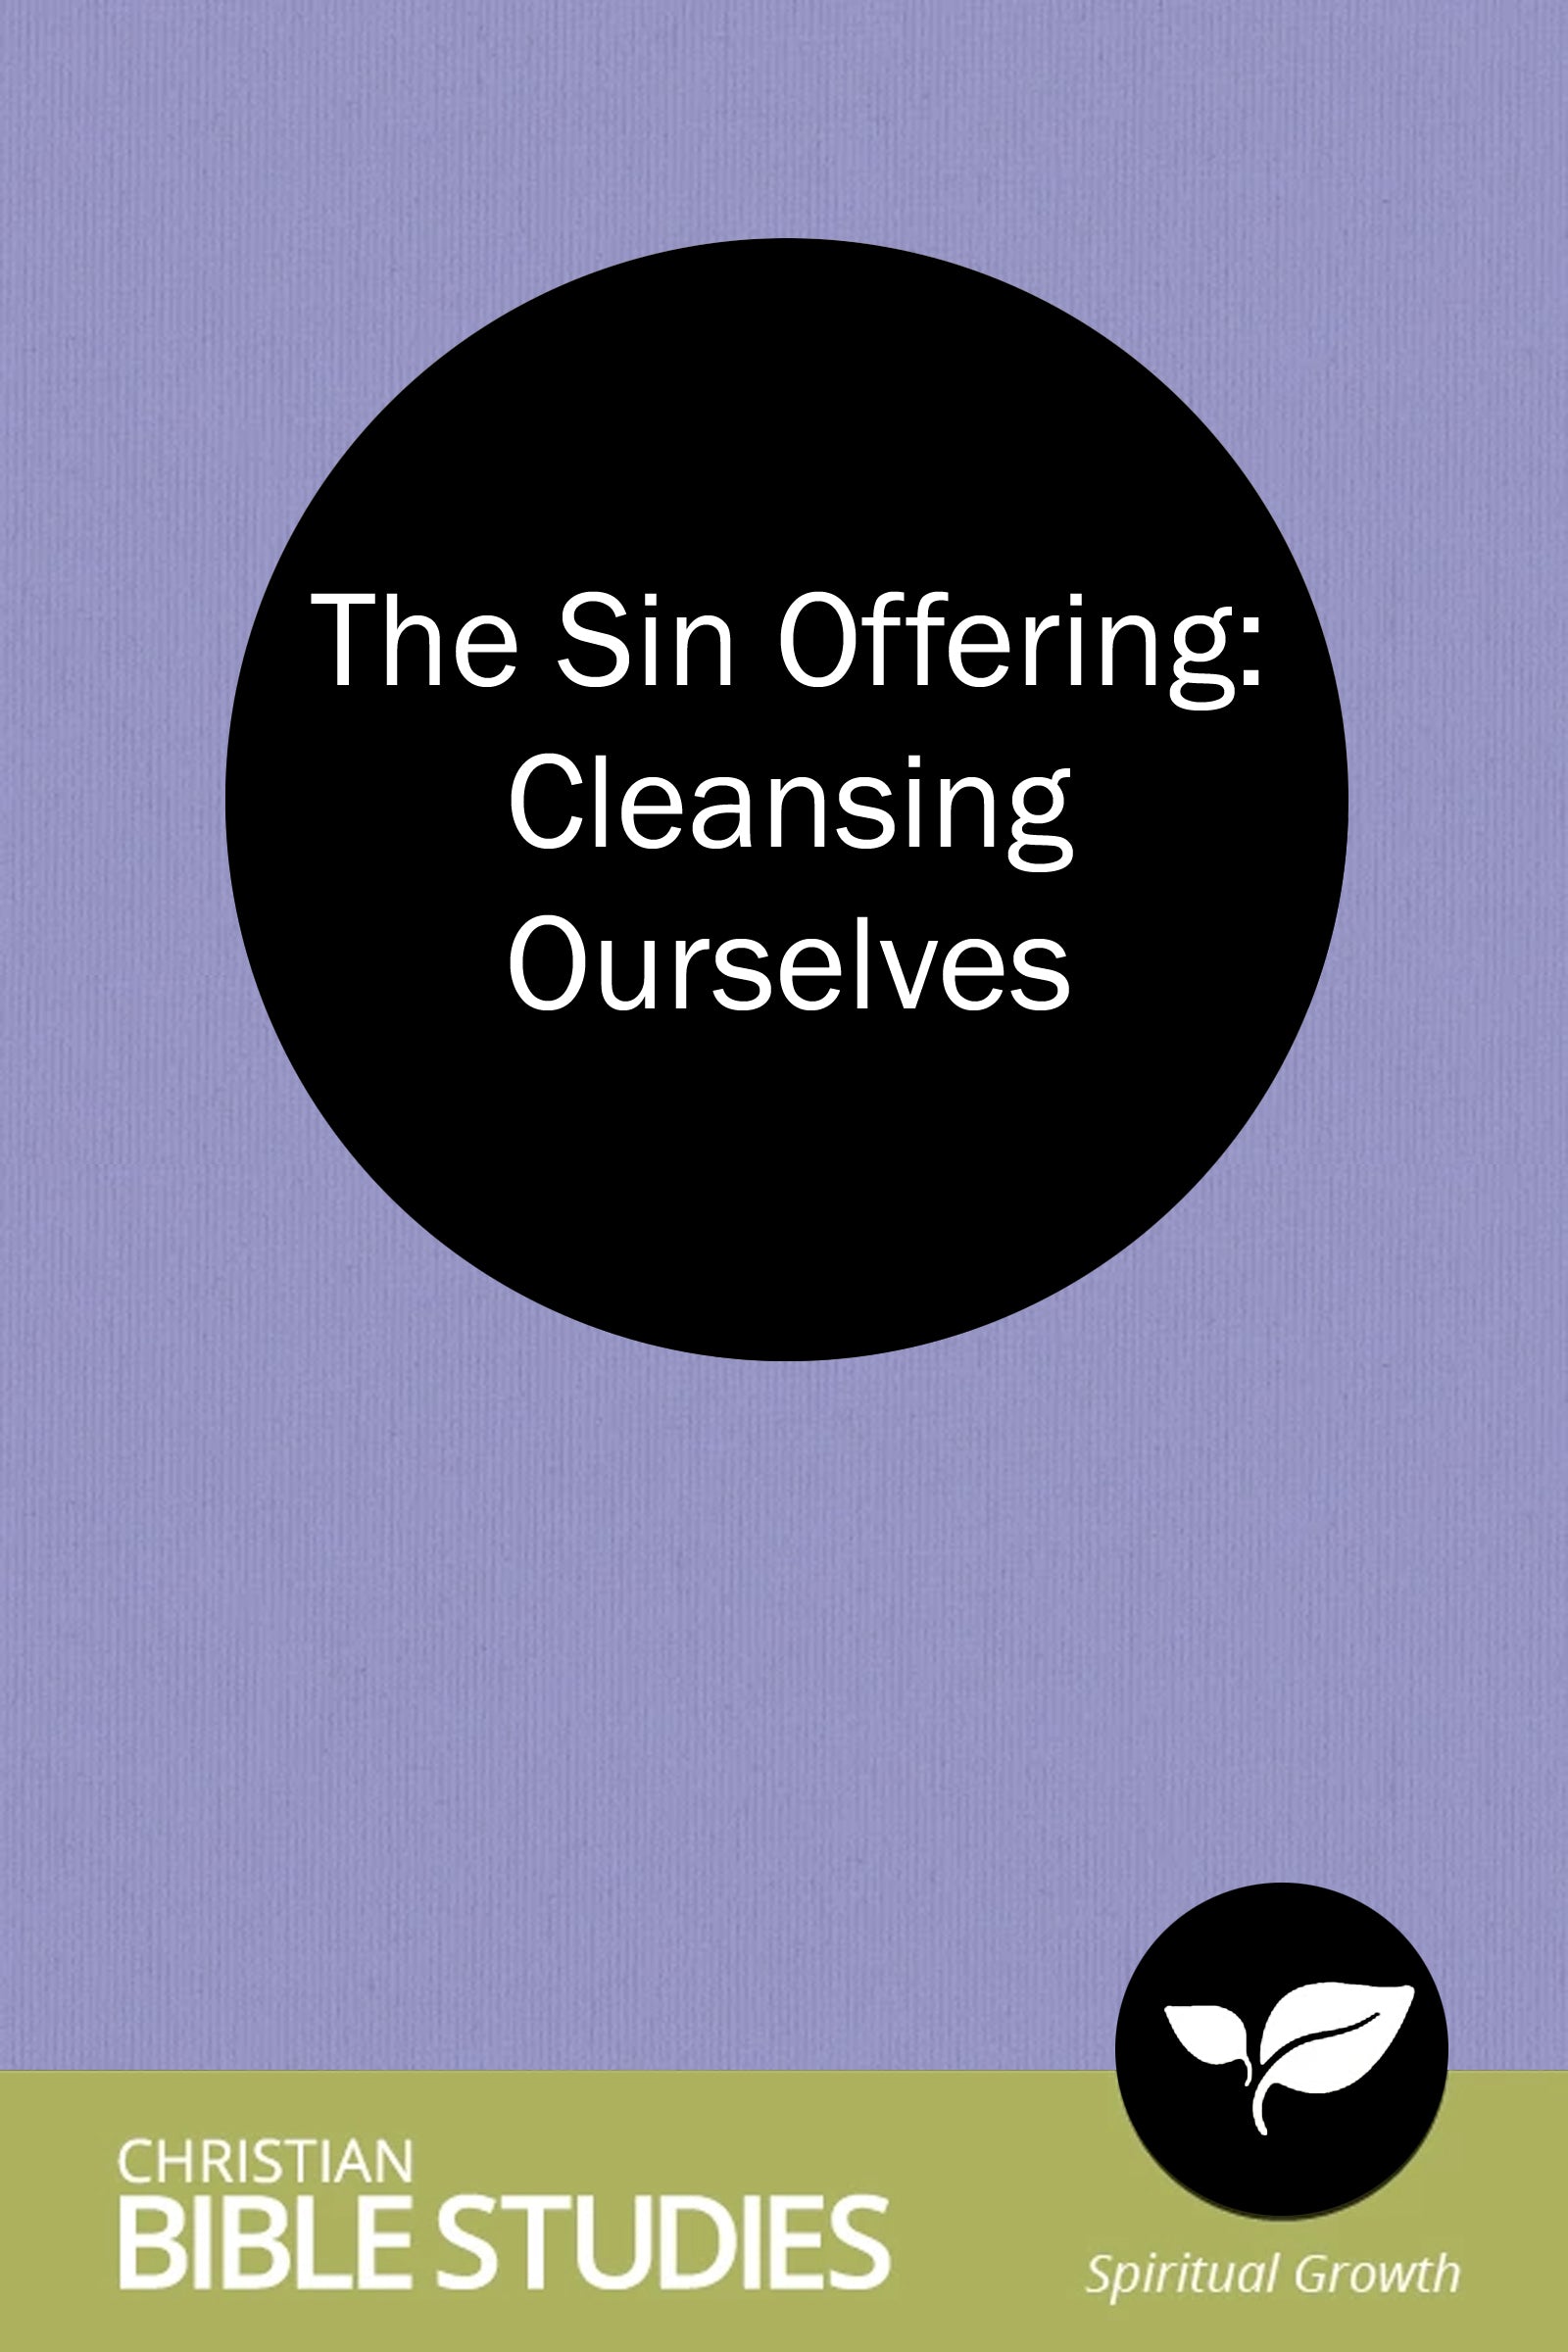 The Sin Offering: Cleansing Ourselves